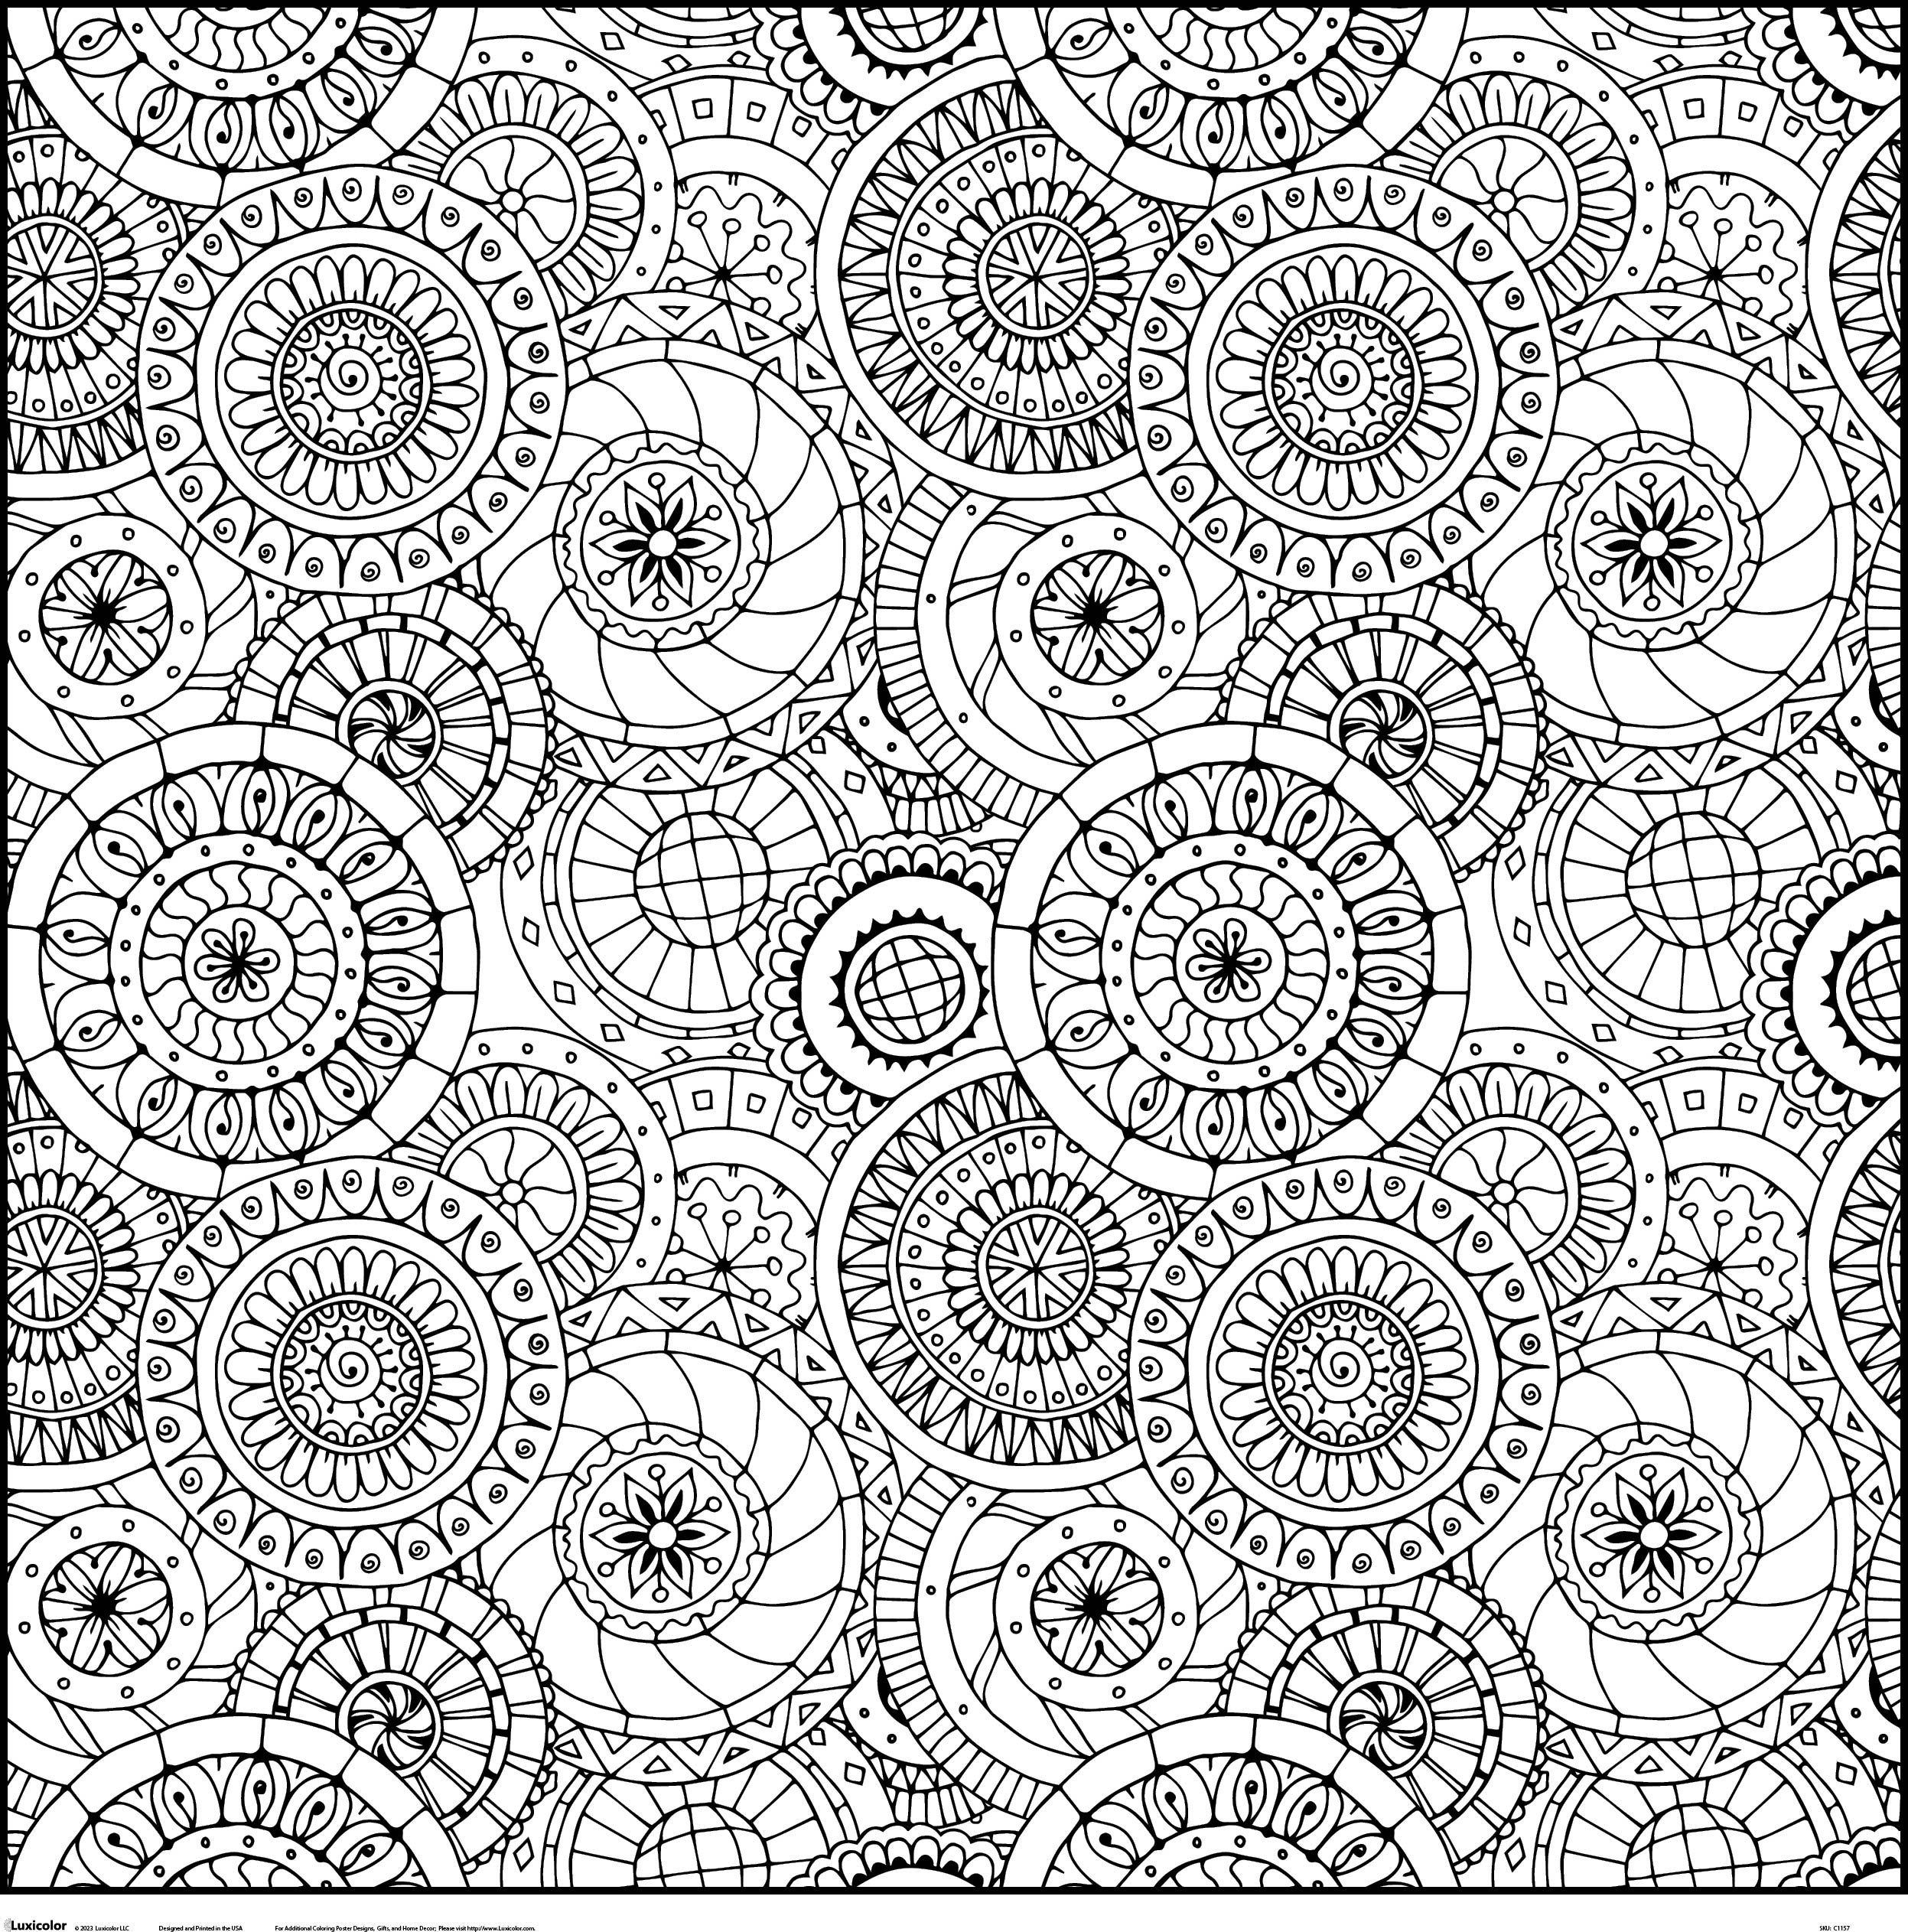 Giant Zendoodle Mandala Coloring Poster Beautiful Coloring Gift for All ...